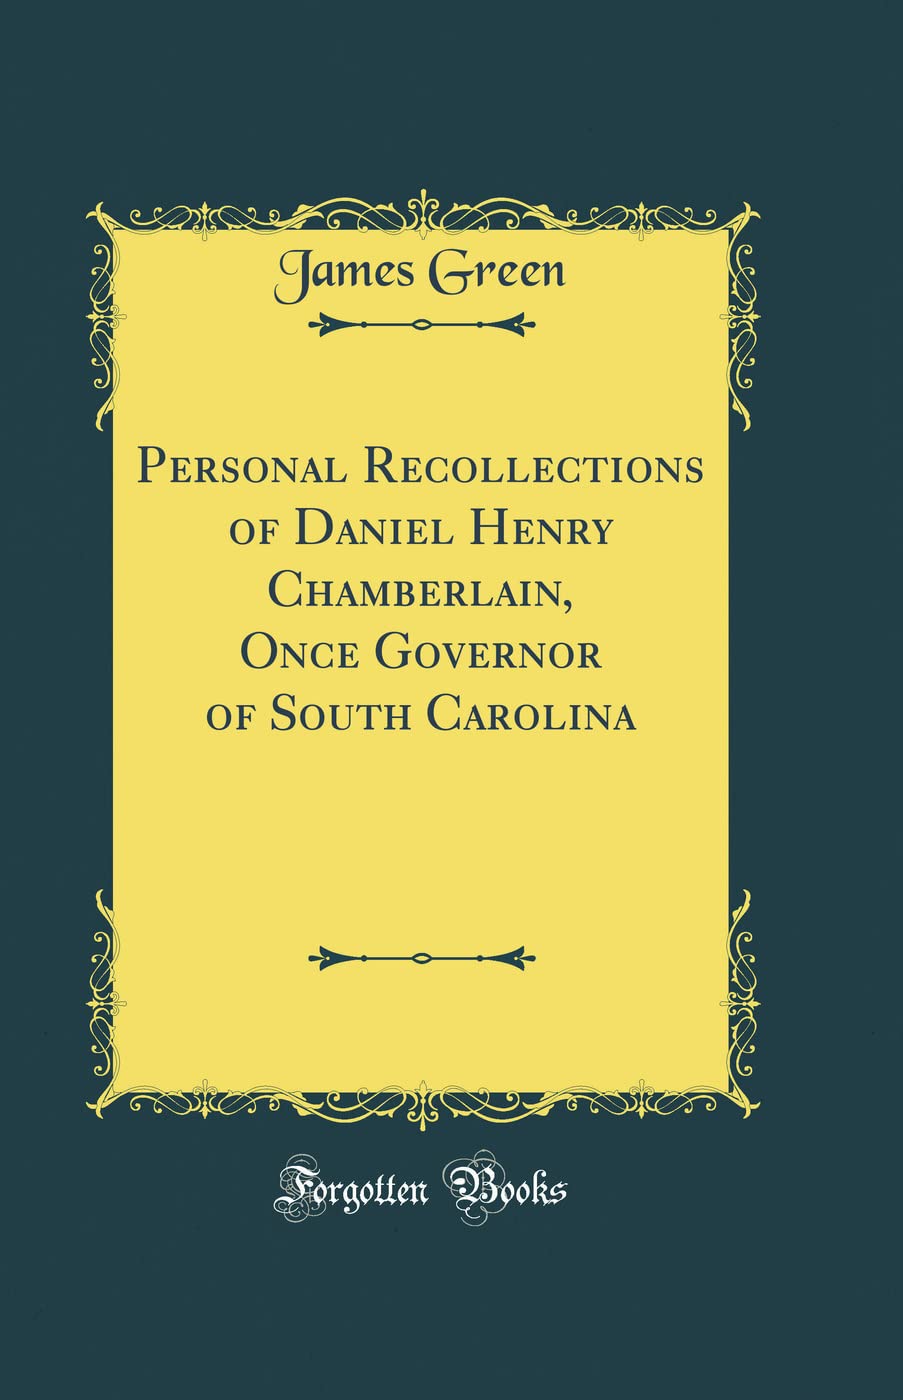 Personal Recollections of Daniel Henry Chamberlain